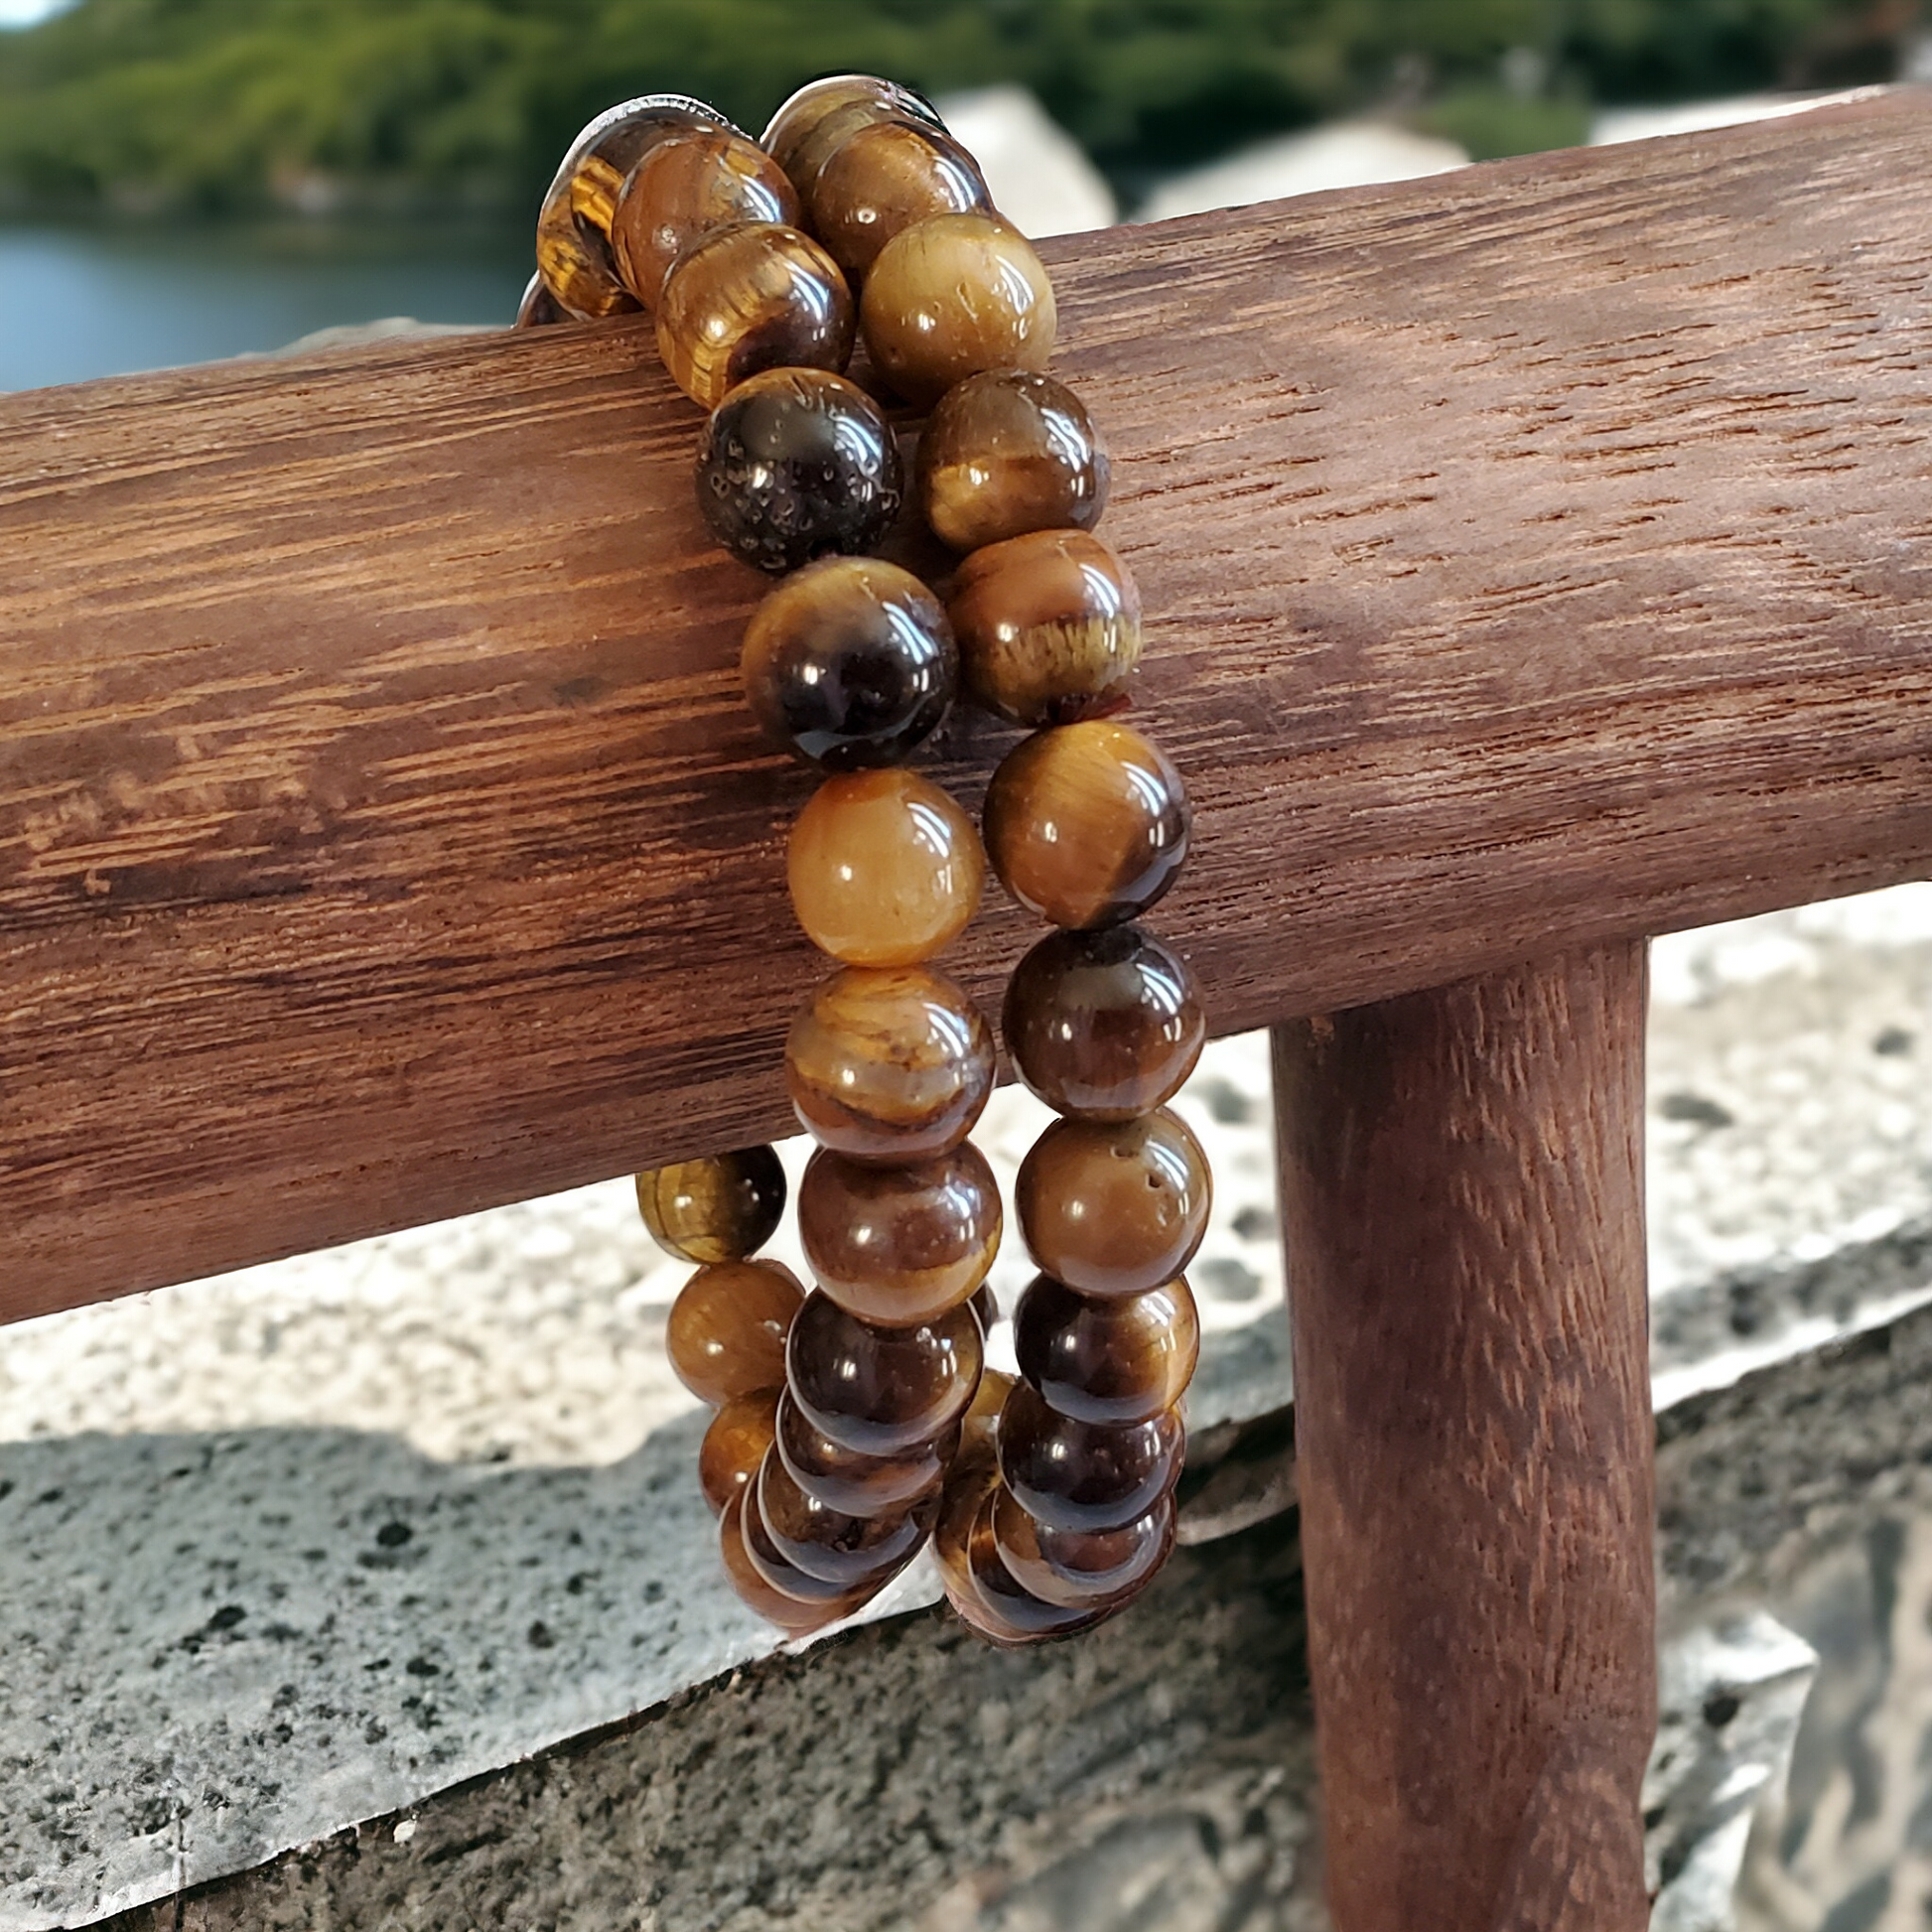 Tiger Eye Bracelet showcasing 8mm beads on stretchy string, tailored for a 7-inch wrist. A harmonious fusion of golden brown hues radiating strength and confidence. The perfect accessory for an empowered and stylish look.